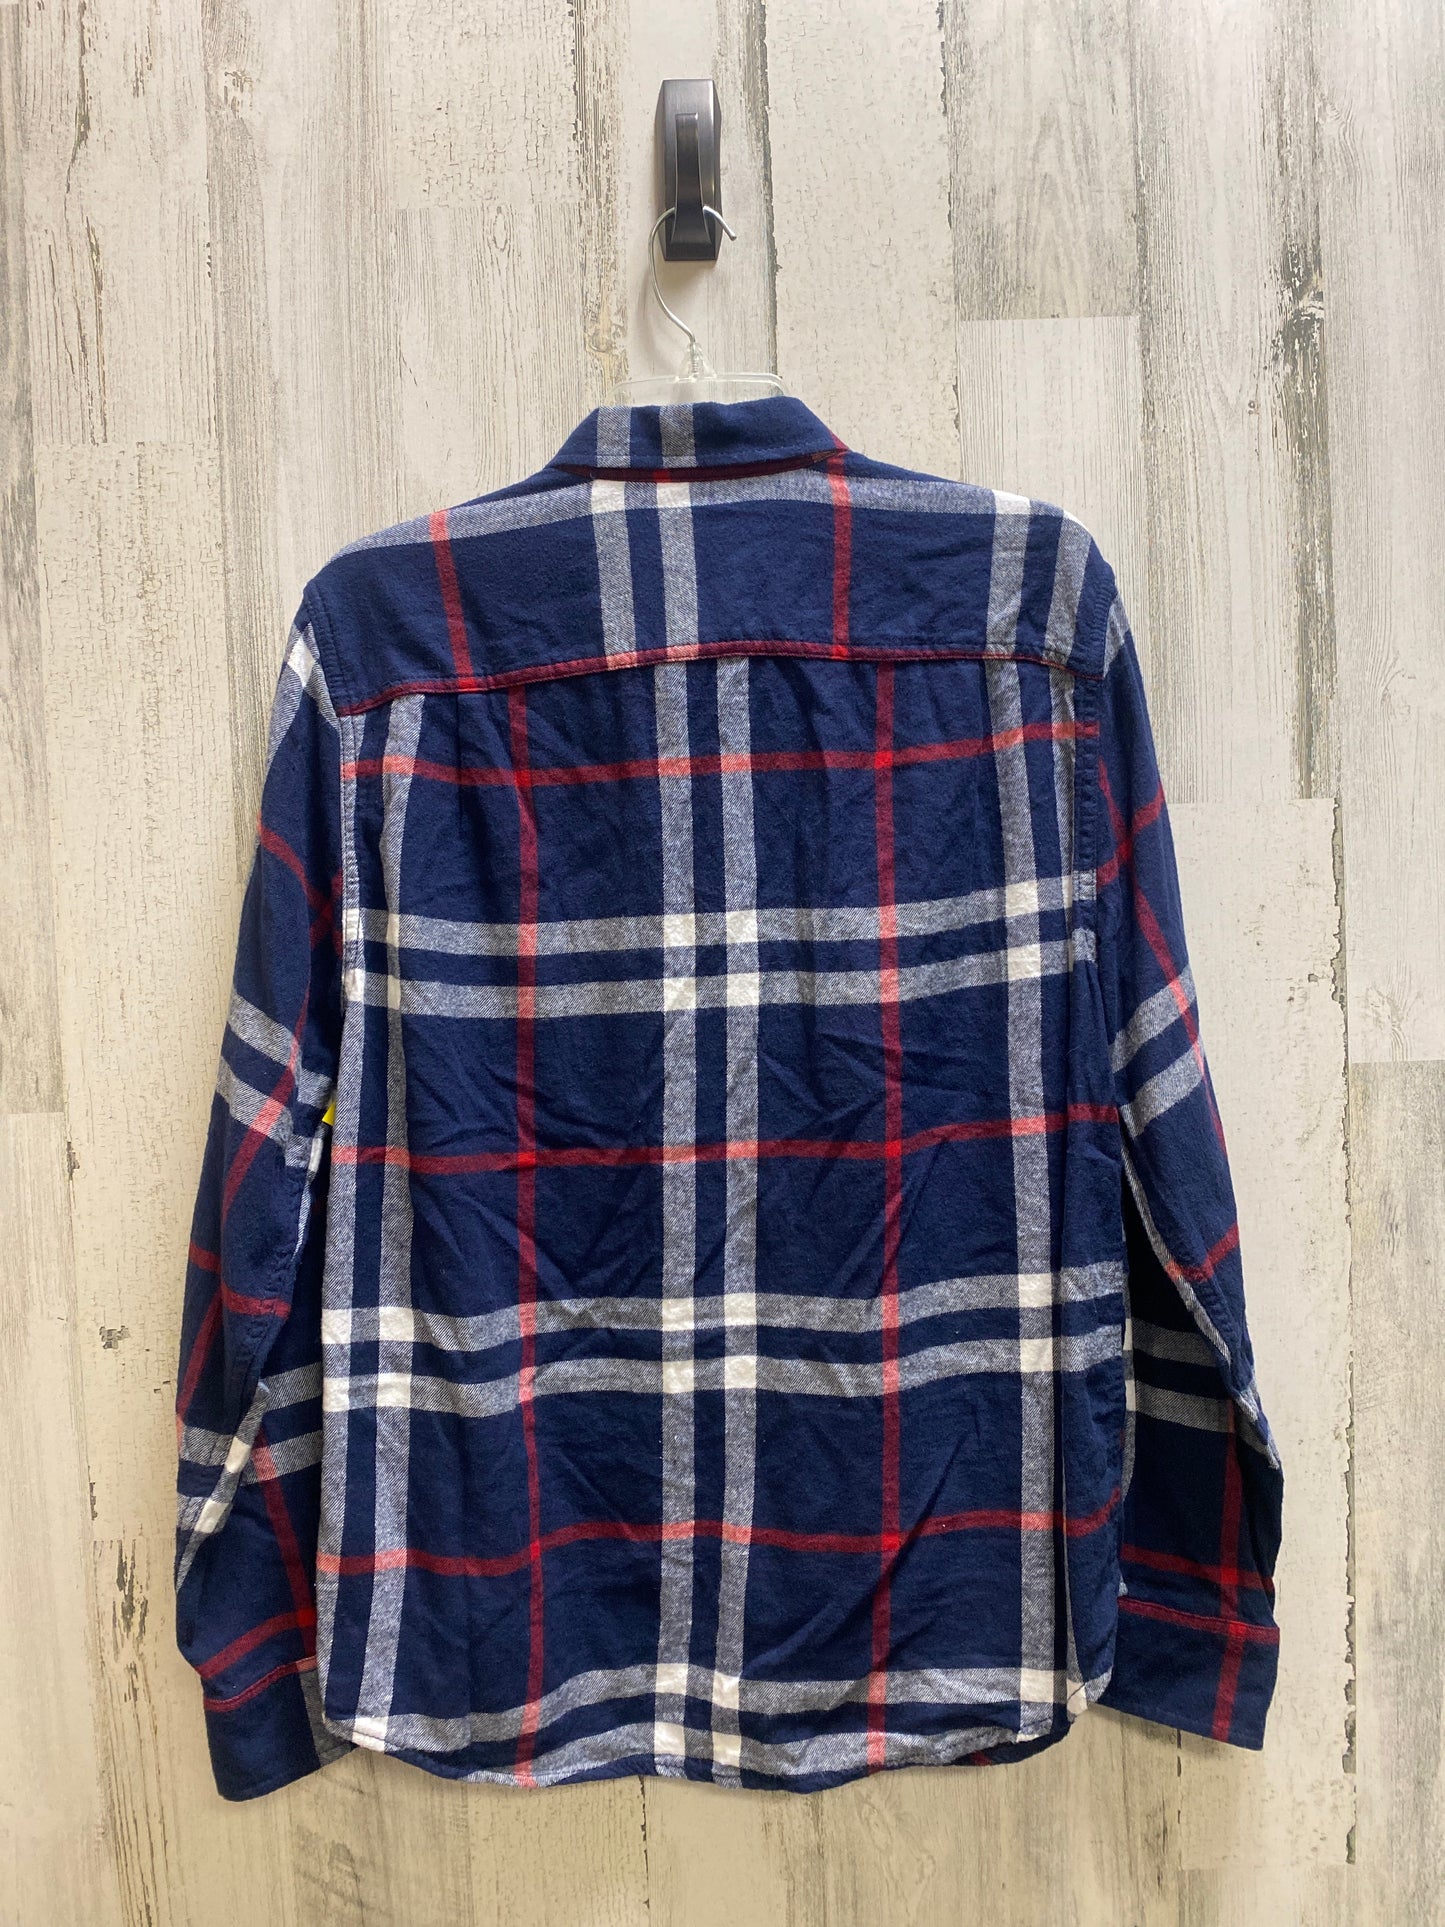 Top Long Sleeve By George  Size: M